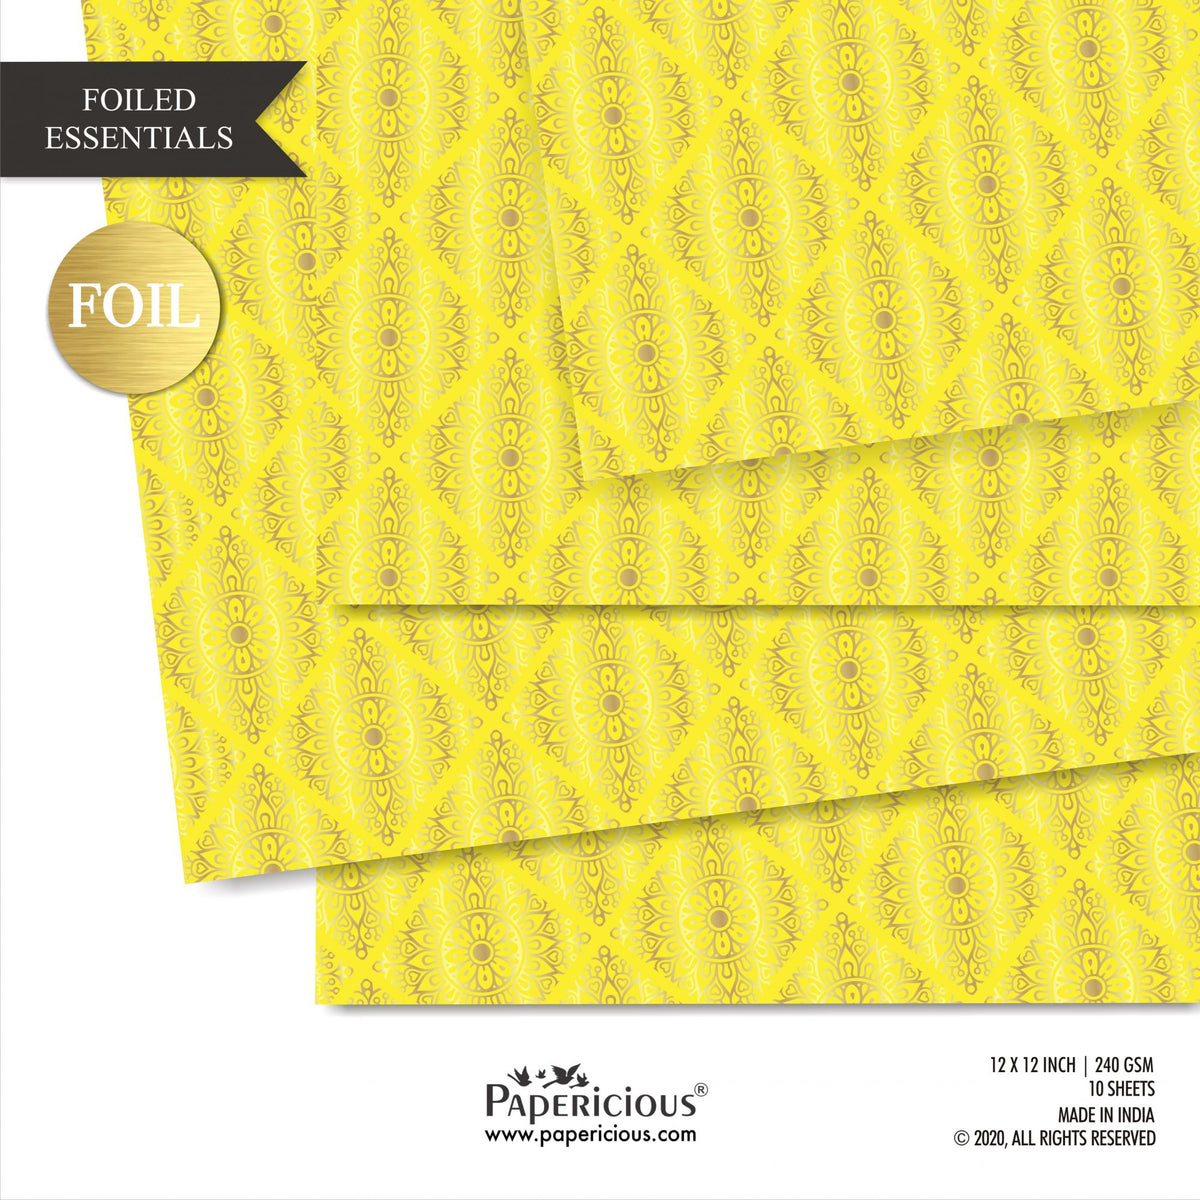 Papericious - Golden Foiled Pattern Scrapbook Papers 12x12 inch / 10 sheets / #12516